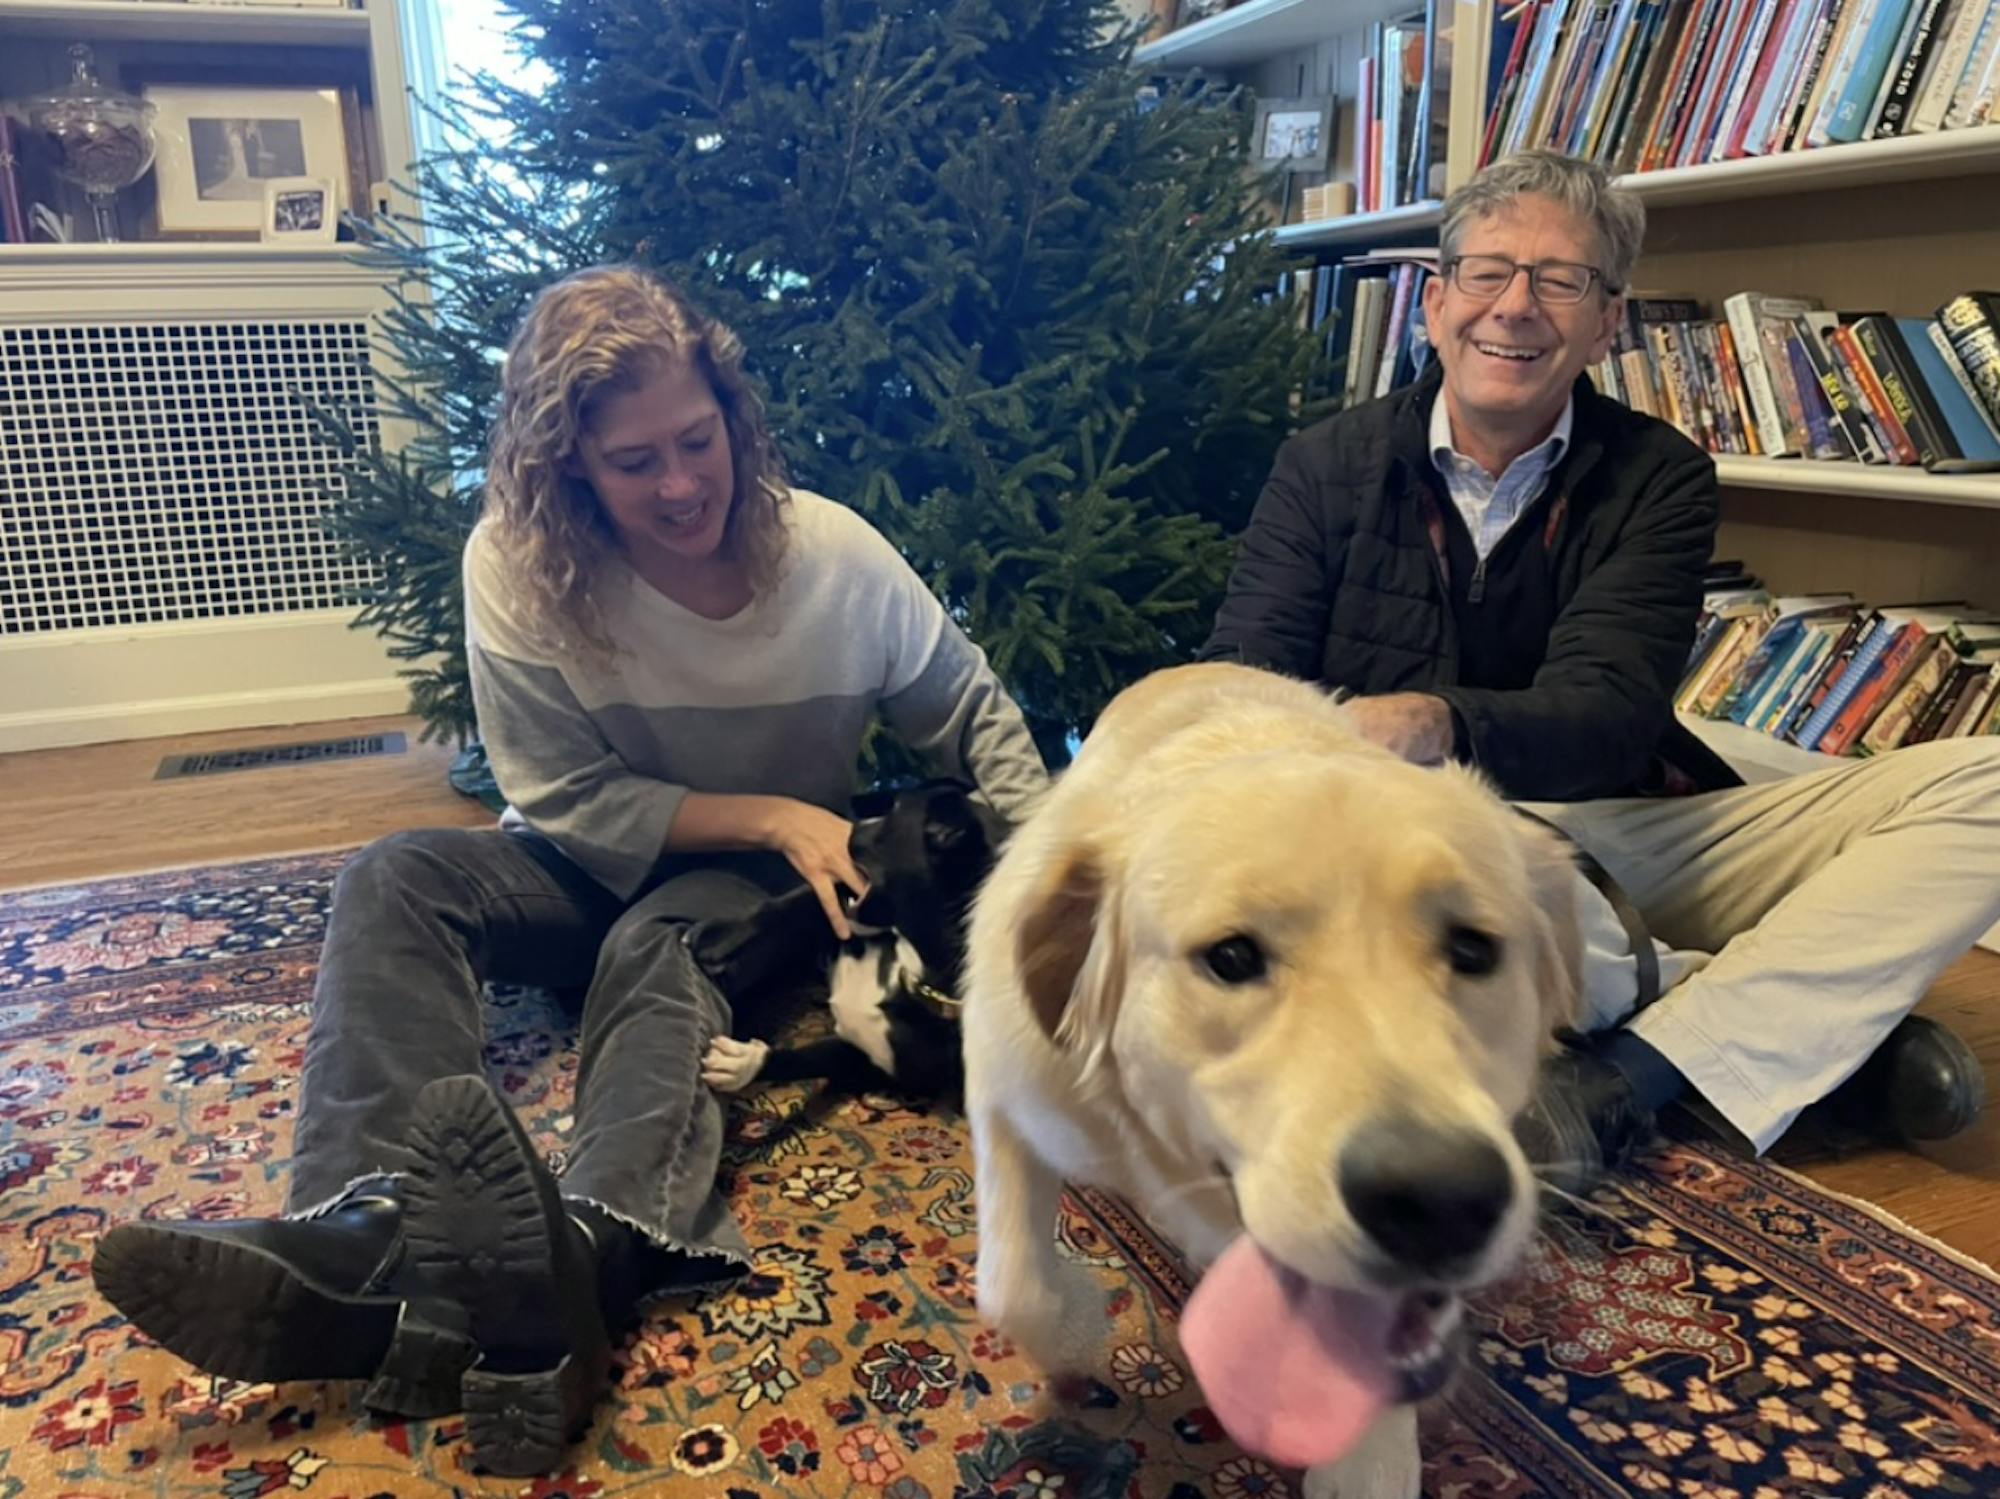 In this image, one dog runs up to the camera. Meanwhile, the other dog gnaws on a woman's hand. She sits next to a man in front of a Christmas tree.